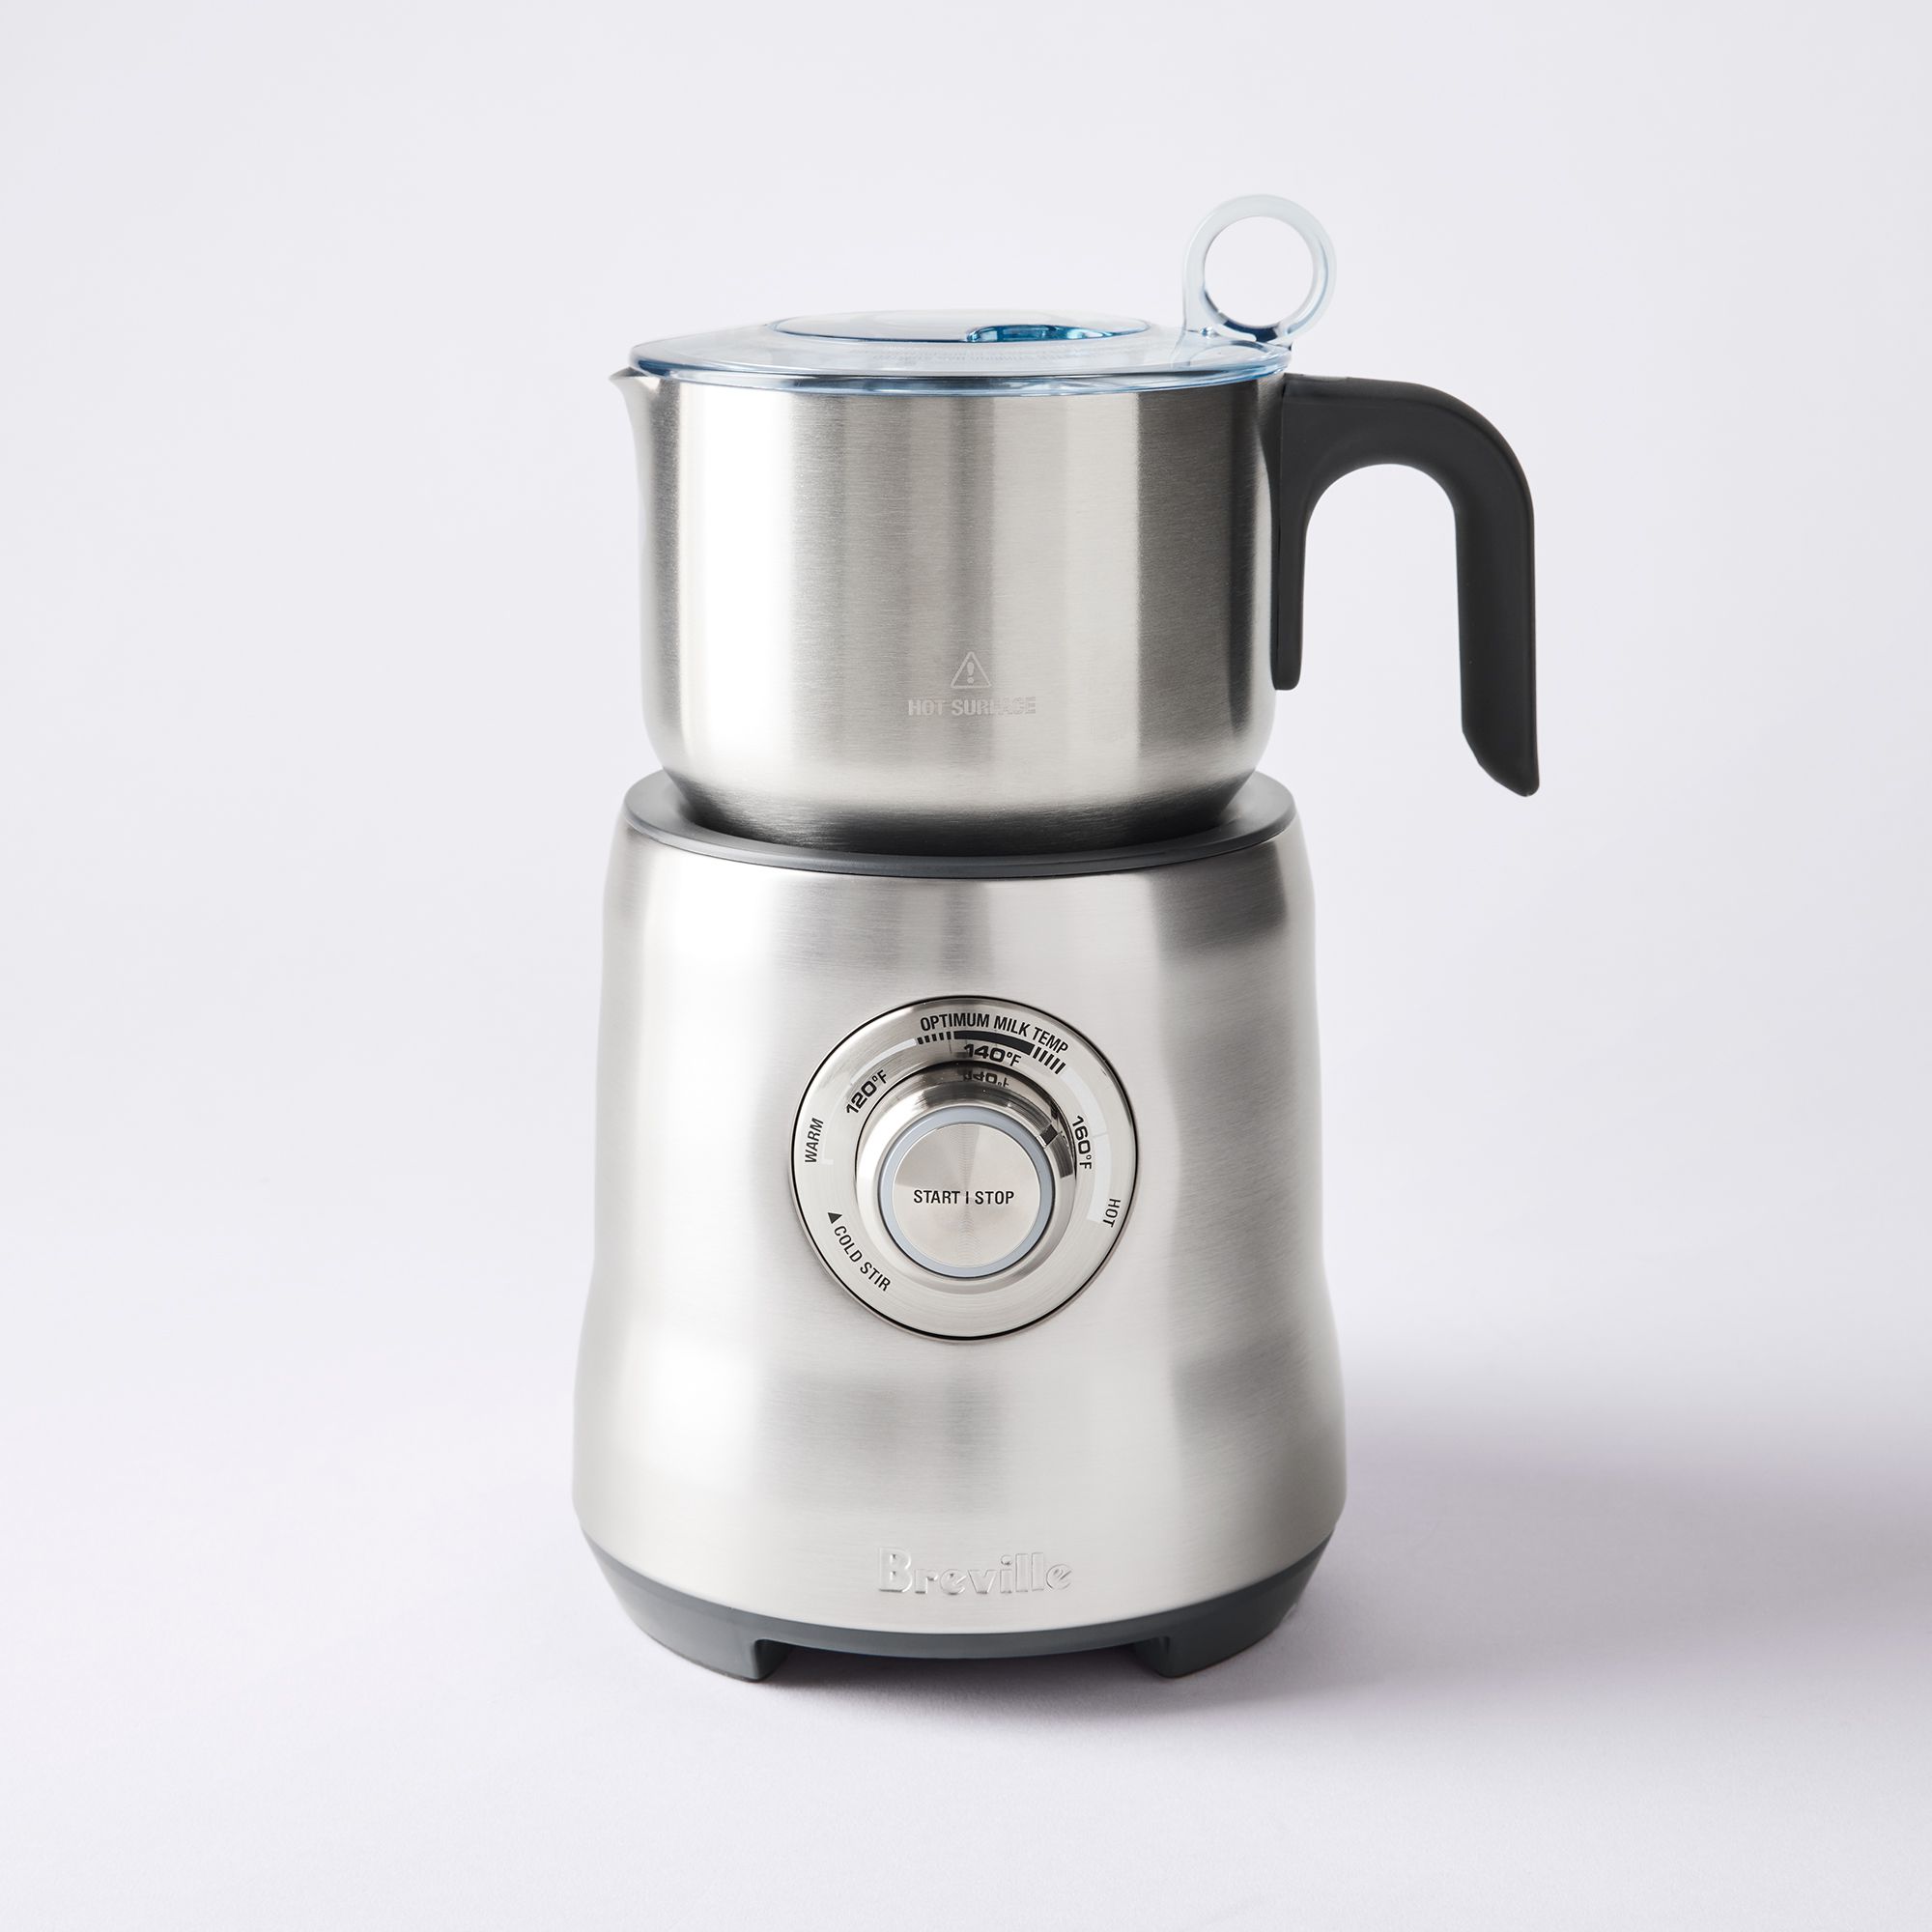 Breville Milk Café Electric Milk Frother, Brushed Stainless Steel on